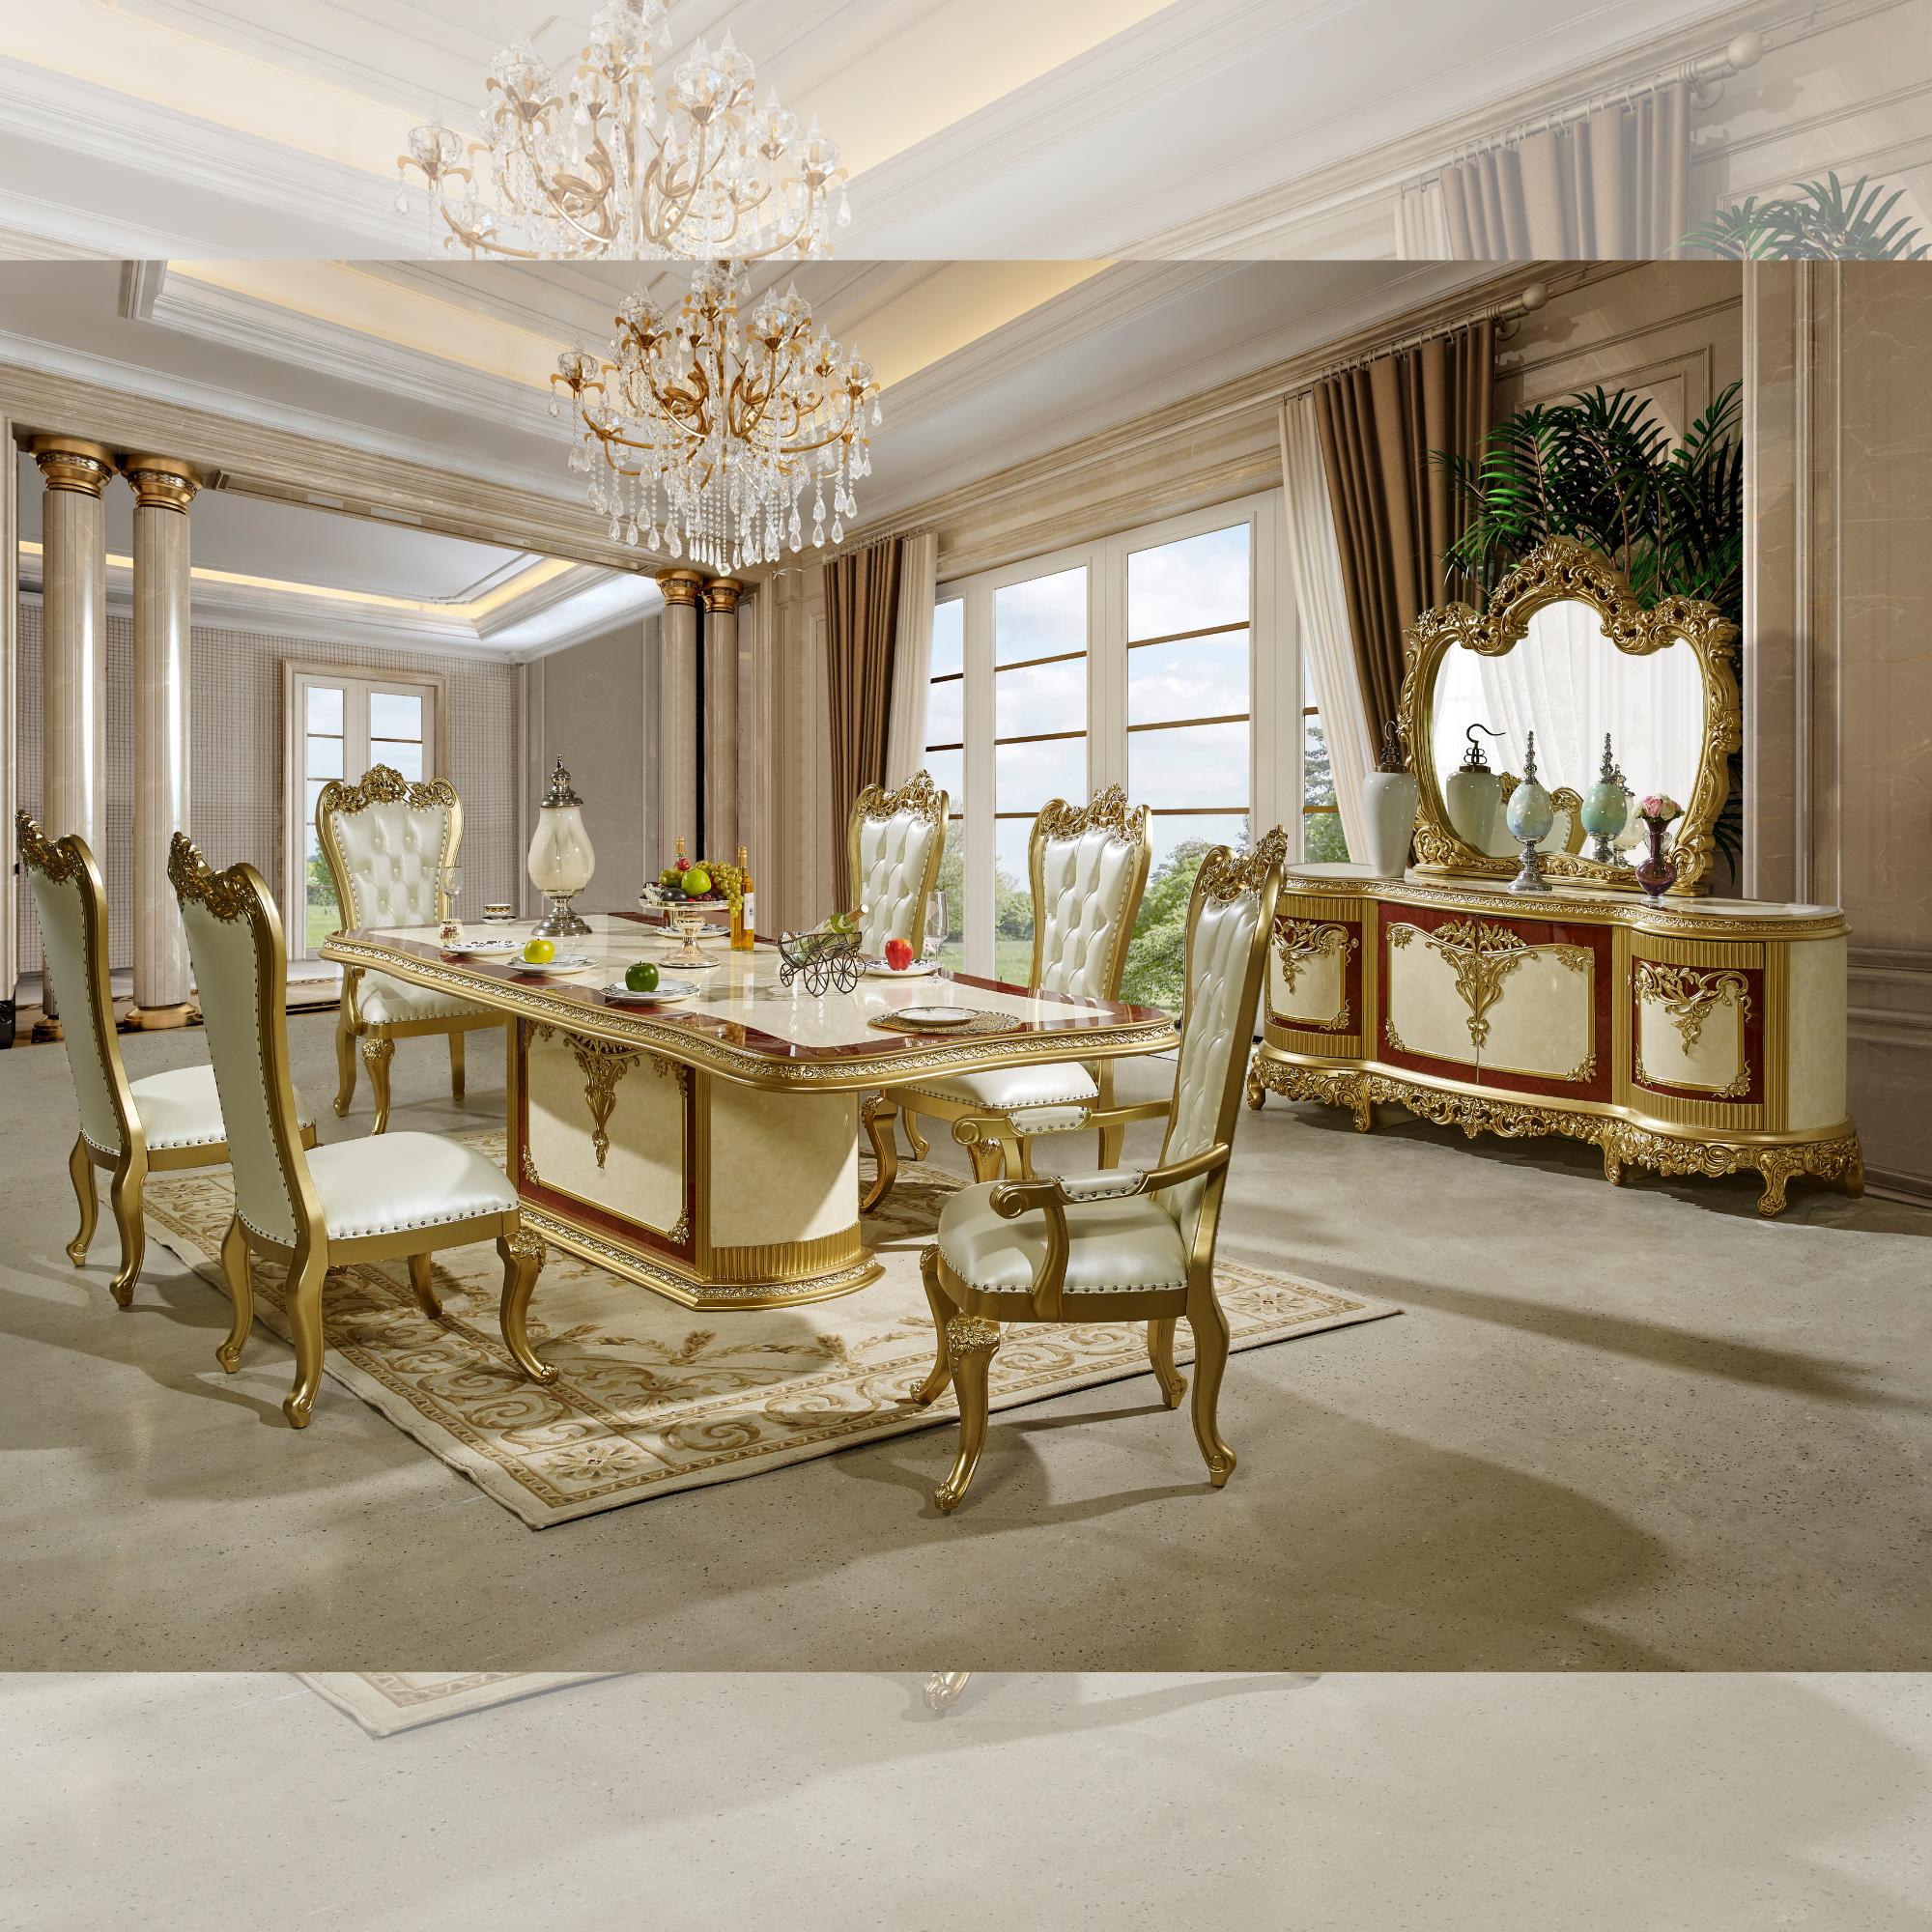 Classic, Traditional Dining Room Set HD-5138 Dining Room Set 7PCS HD-DIN5138-SET HD-DIN5138-SET in White, Gold Leather